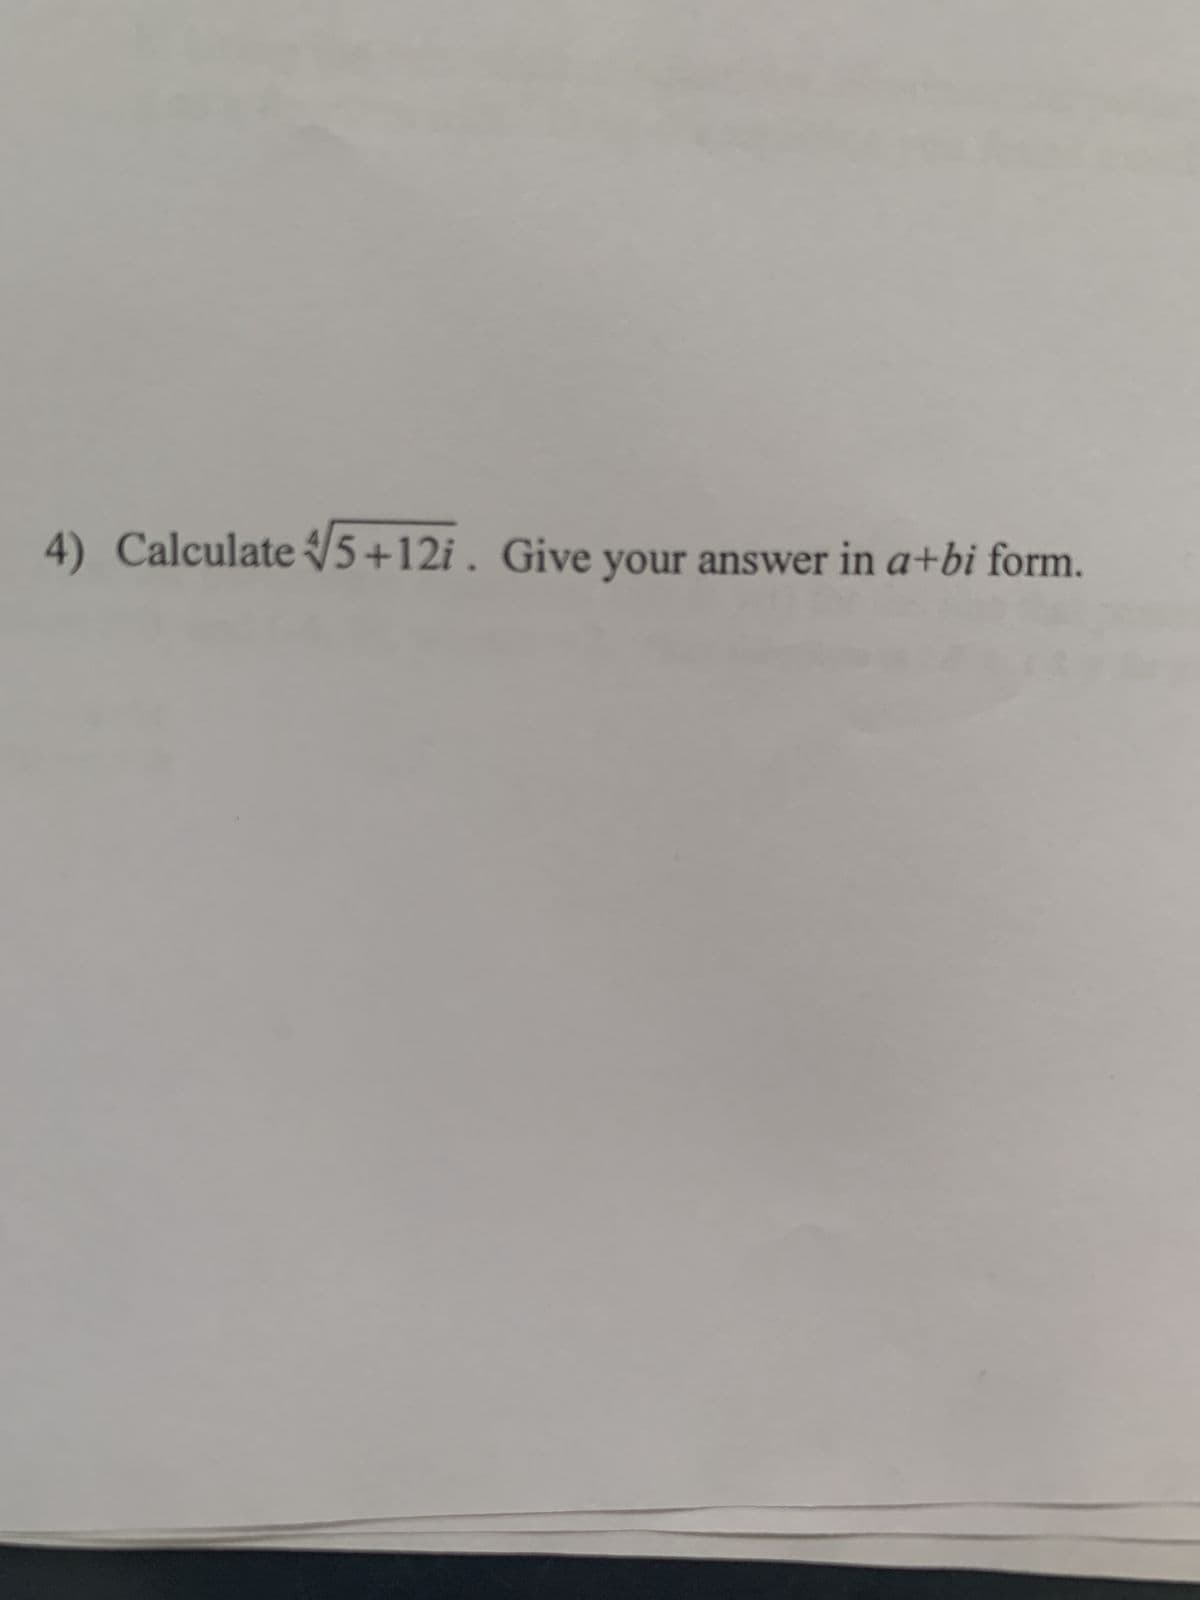 4) Calculate √5+12i. Give your answer in a+bi form.